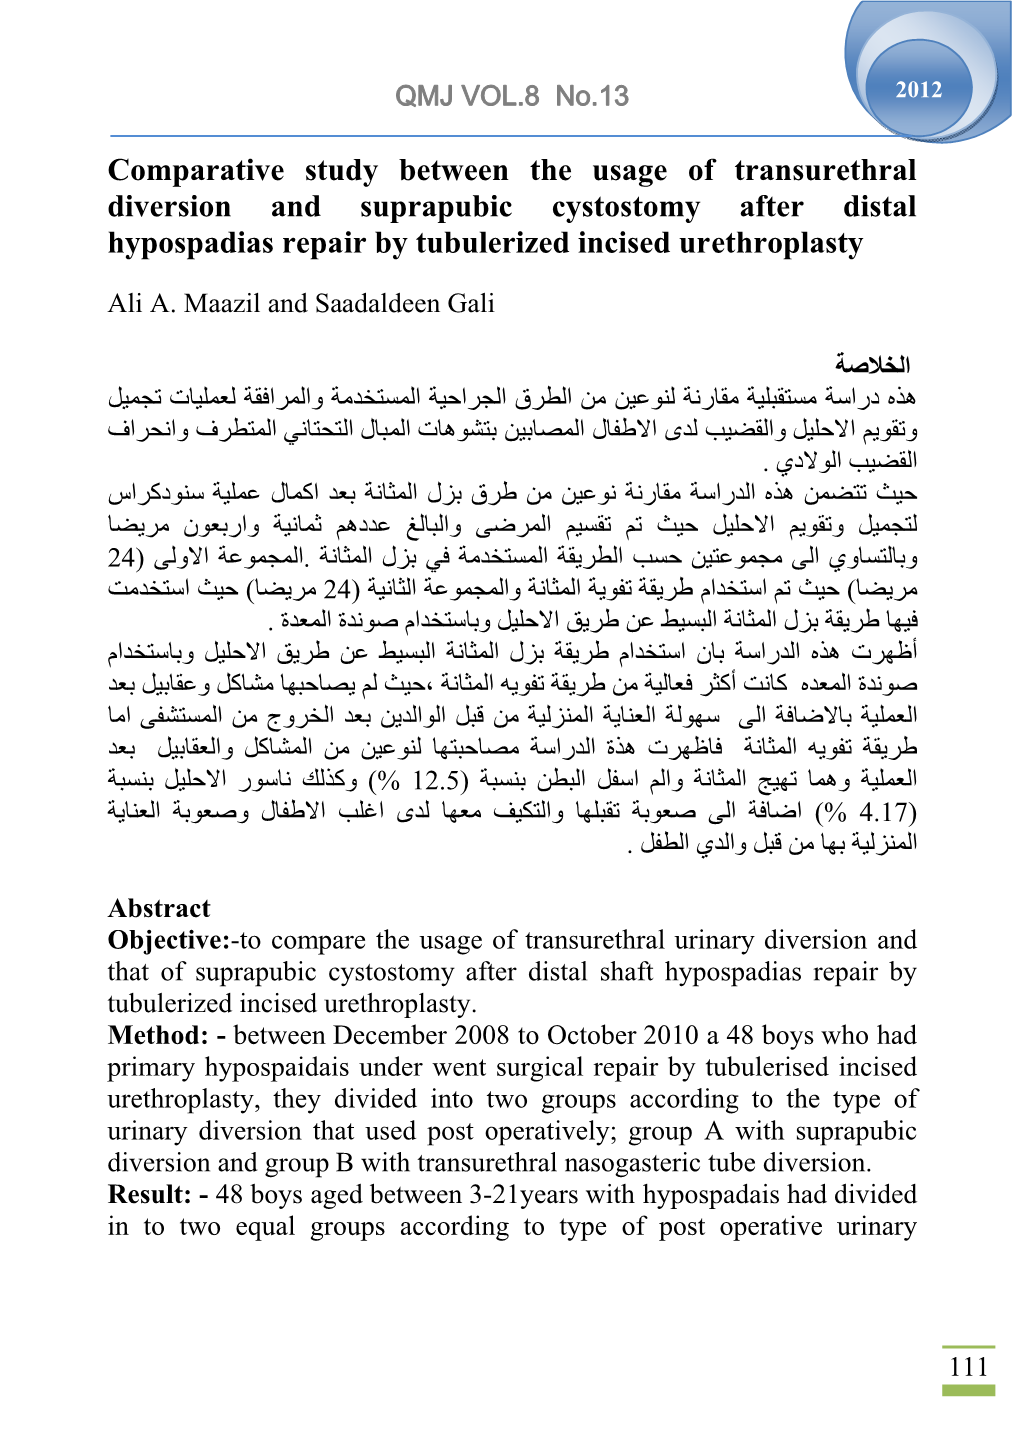 Comparative Study Between the Usage of Transurethral Diversion and Suprapubic Cystostomy After Distal Hypospadias Repair by Tubulerized Incised Urethroplasty